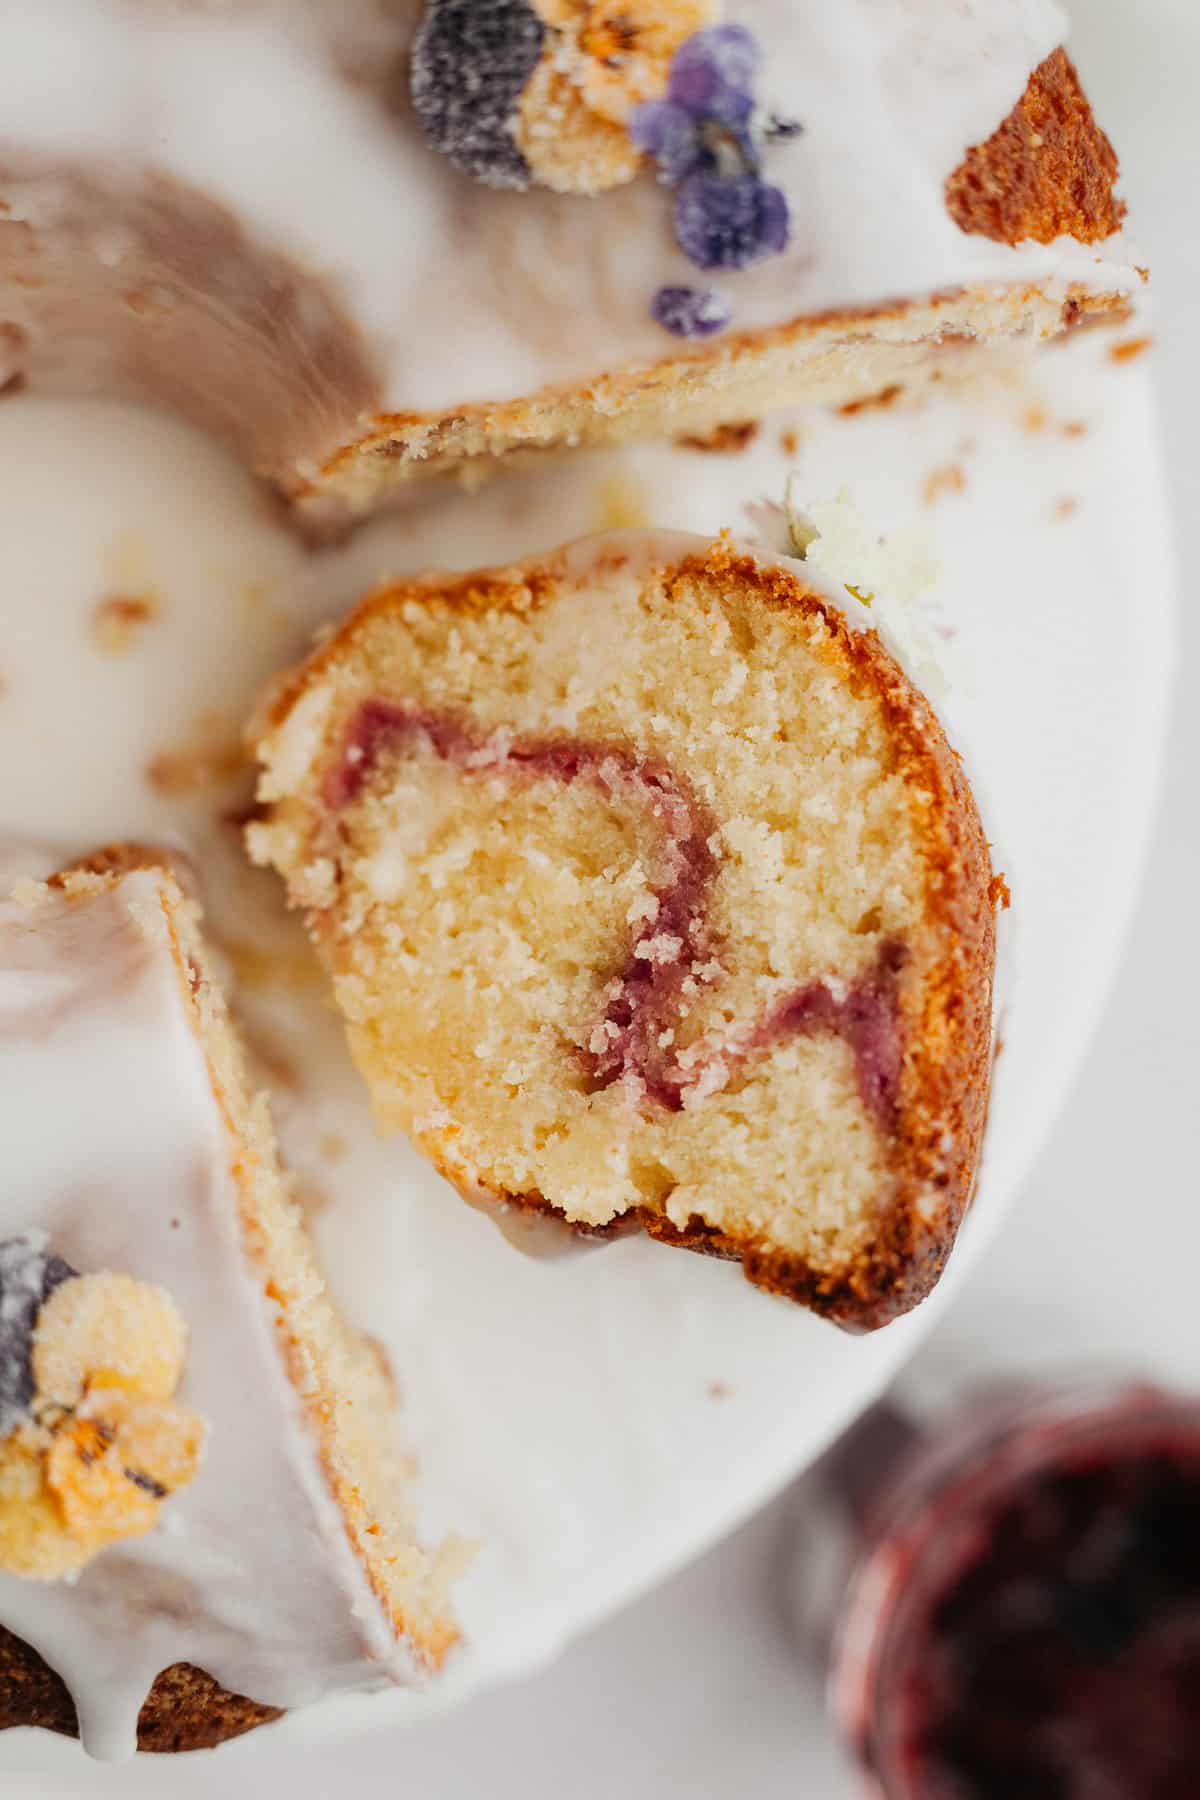 A close up of a slice of bundt cake covered in a white glaze with a raspberry swirl.